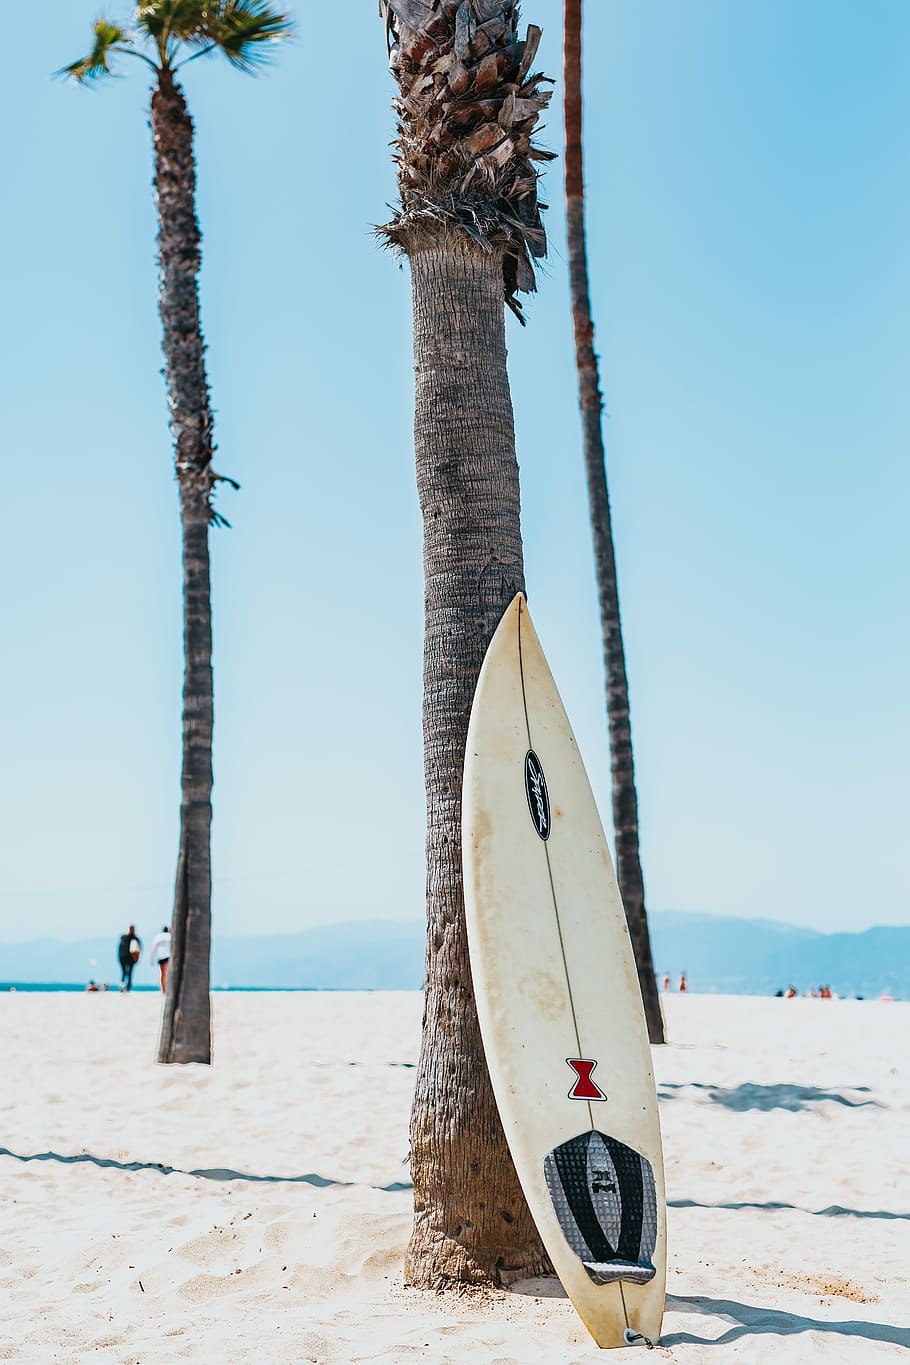 white and black surfboard leaning on gray Mexican palm tree, surfboard leaning on palm tree, HD wallpaper